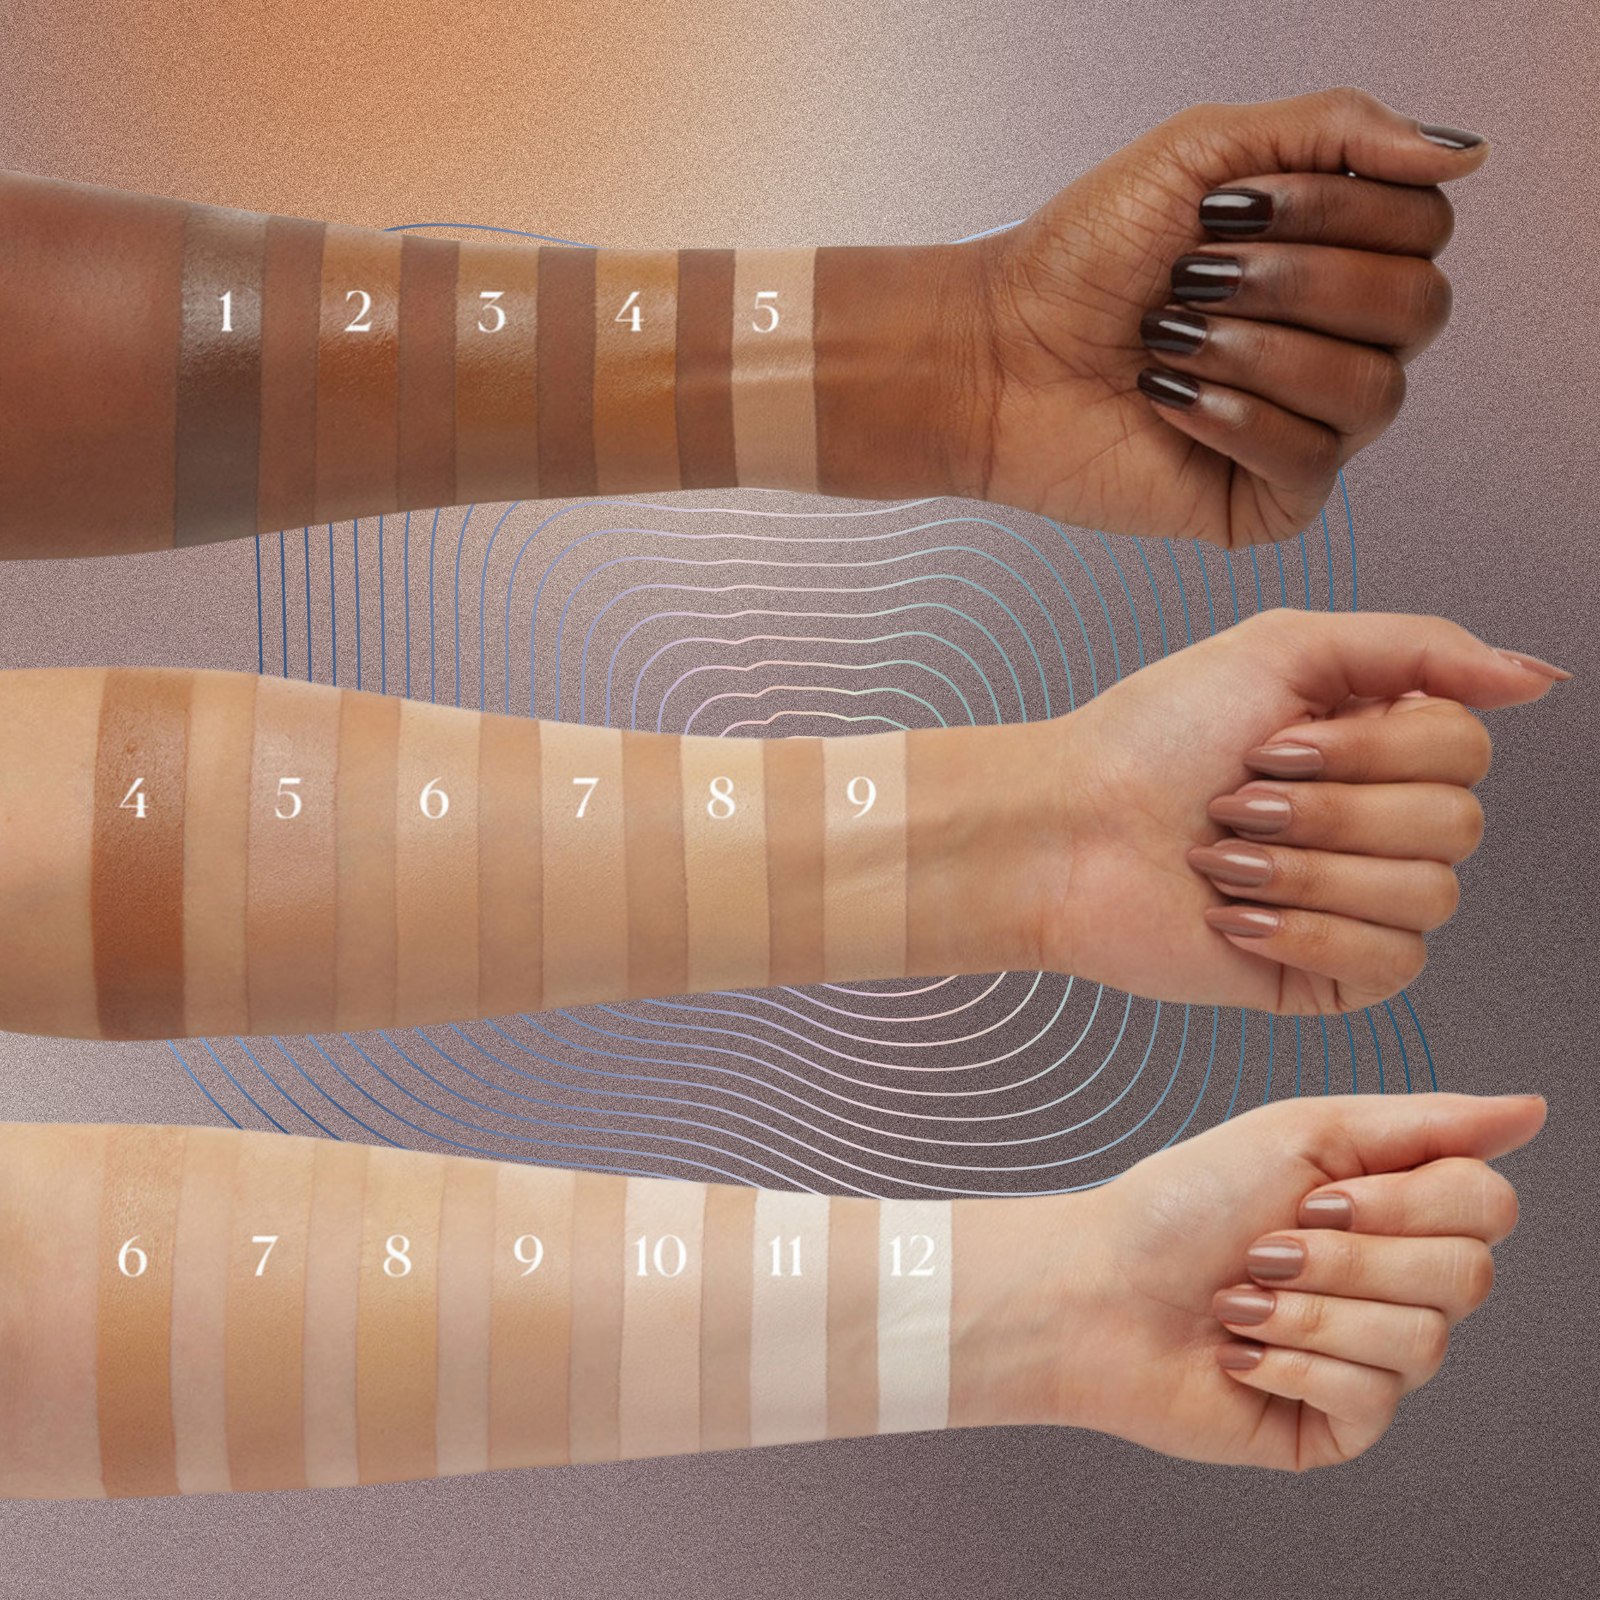 Does beauty have the (shade) range?